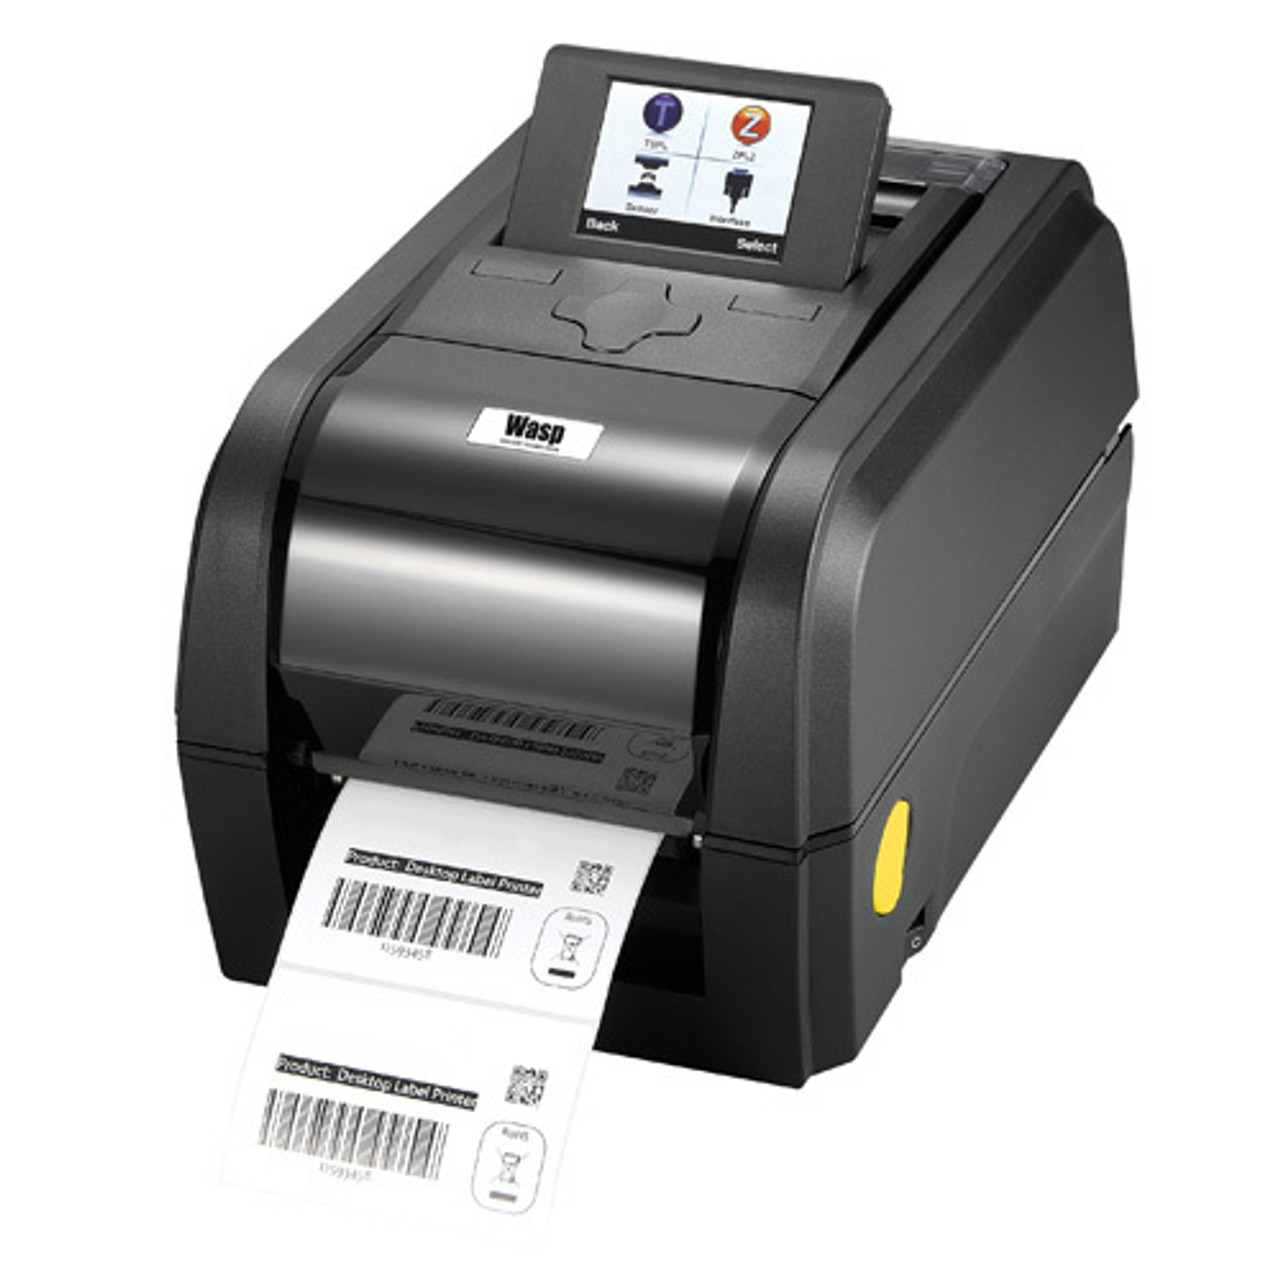 Label & POS Systems - Label Printers - Wasp Barcode Label Printers